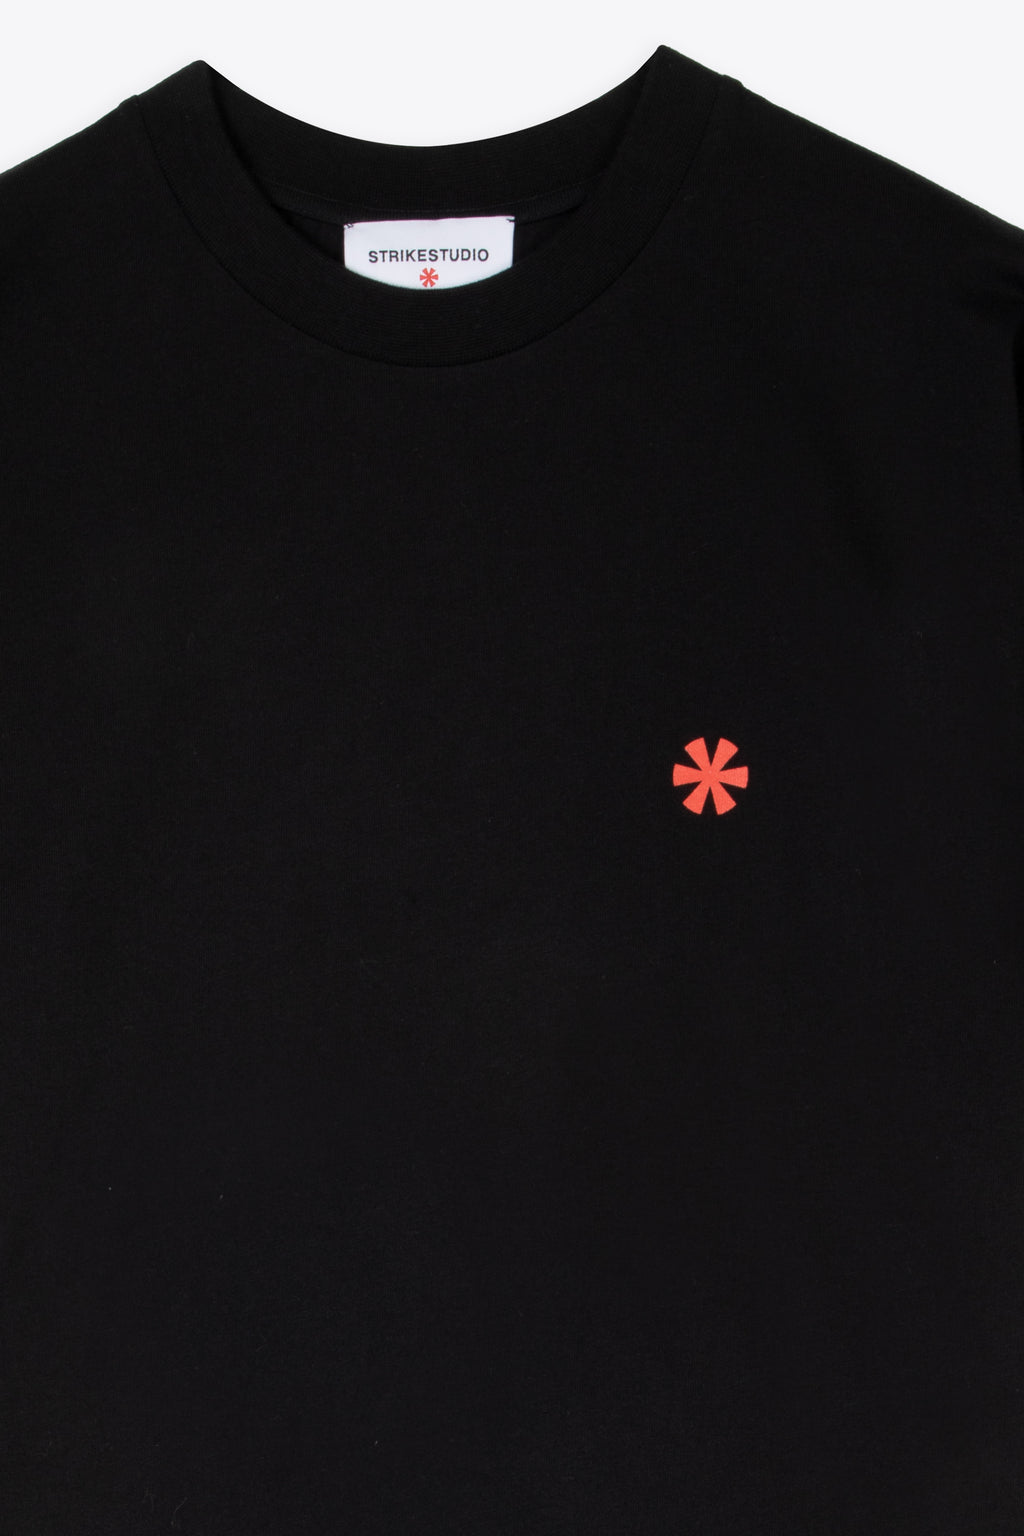 alt-image__Black-cotton-t-shirt-with-red-logo-printed